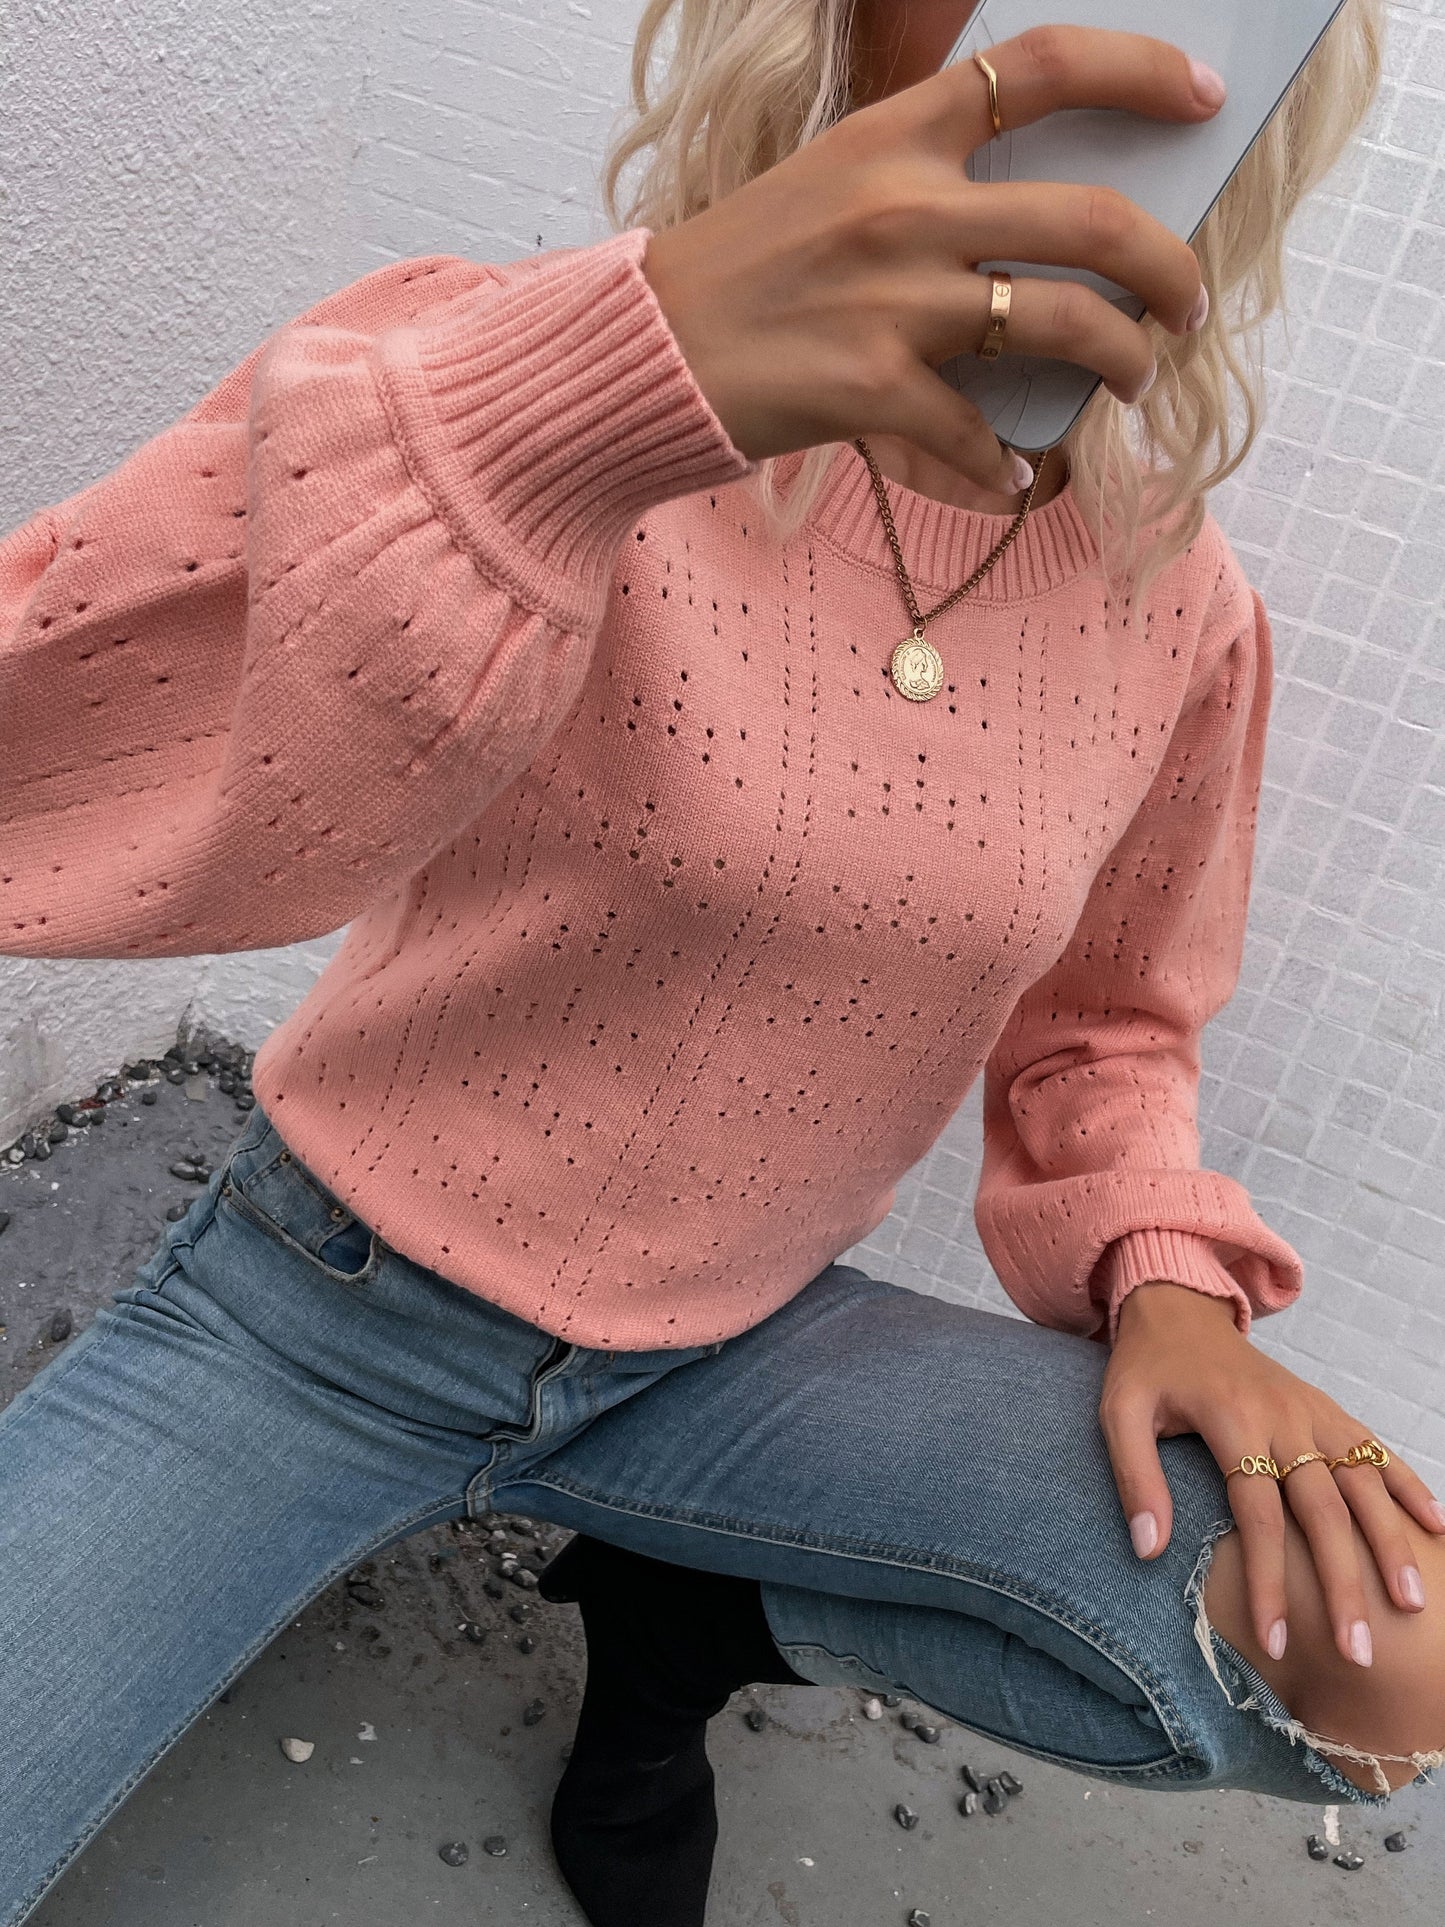 Times are Changing Long Sleeve Sweater